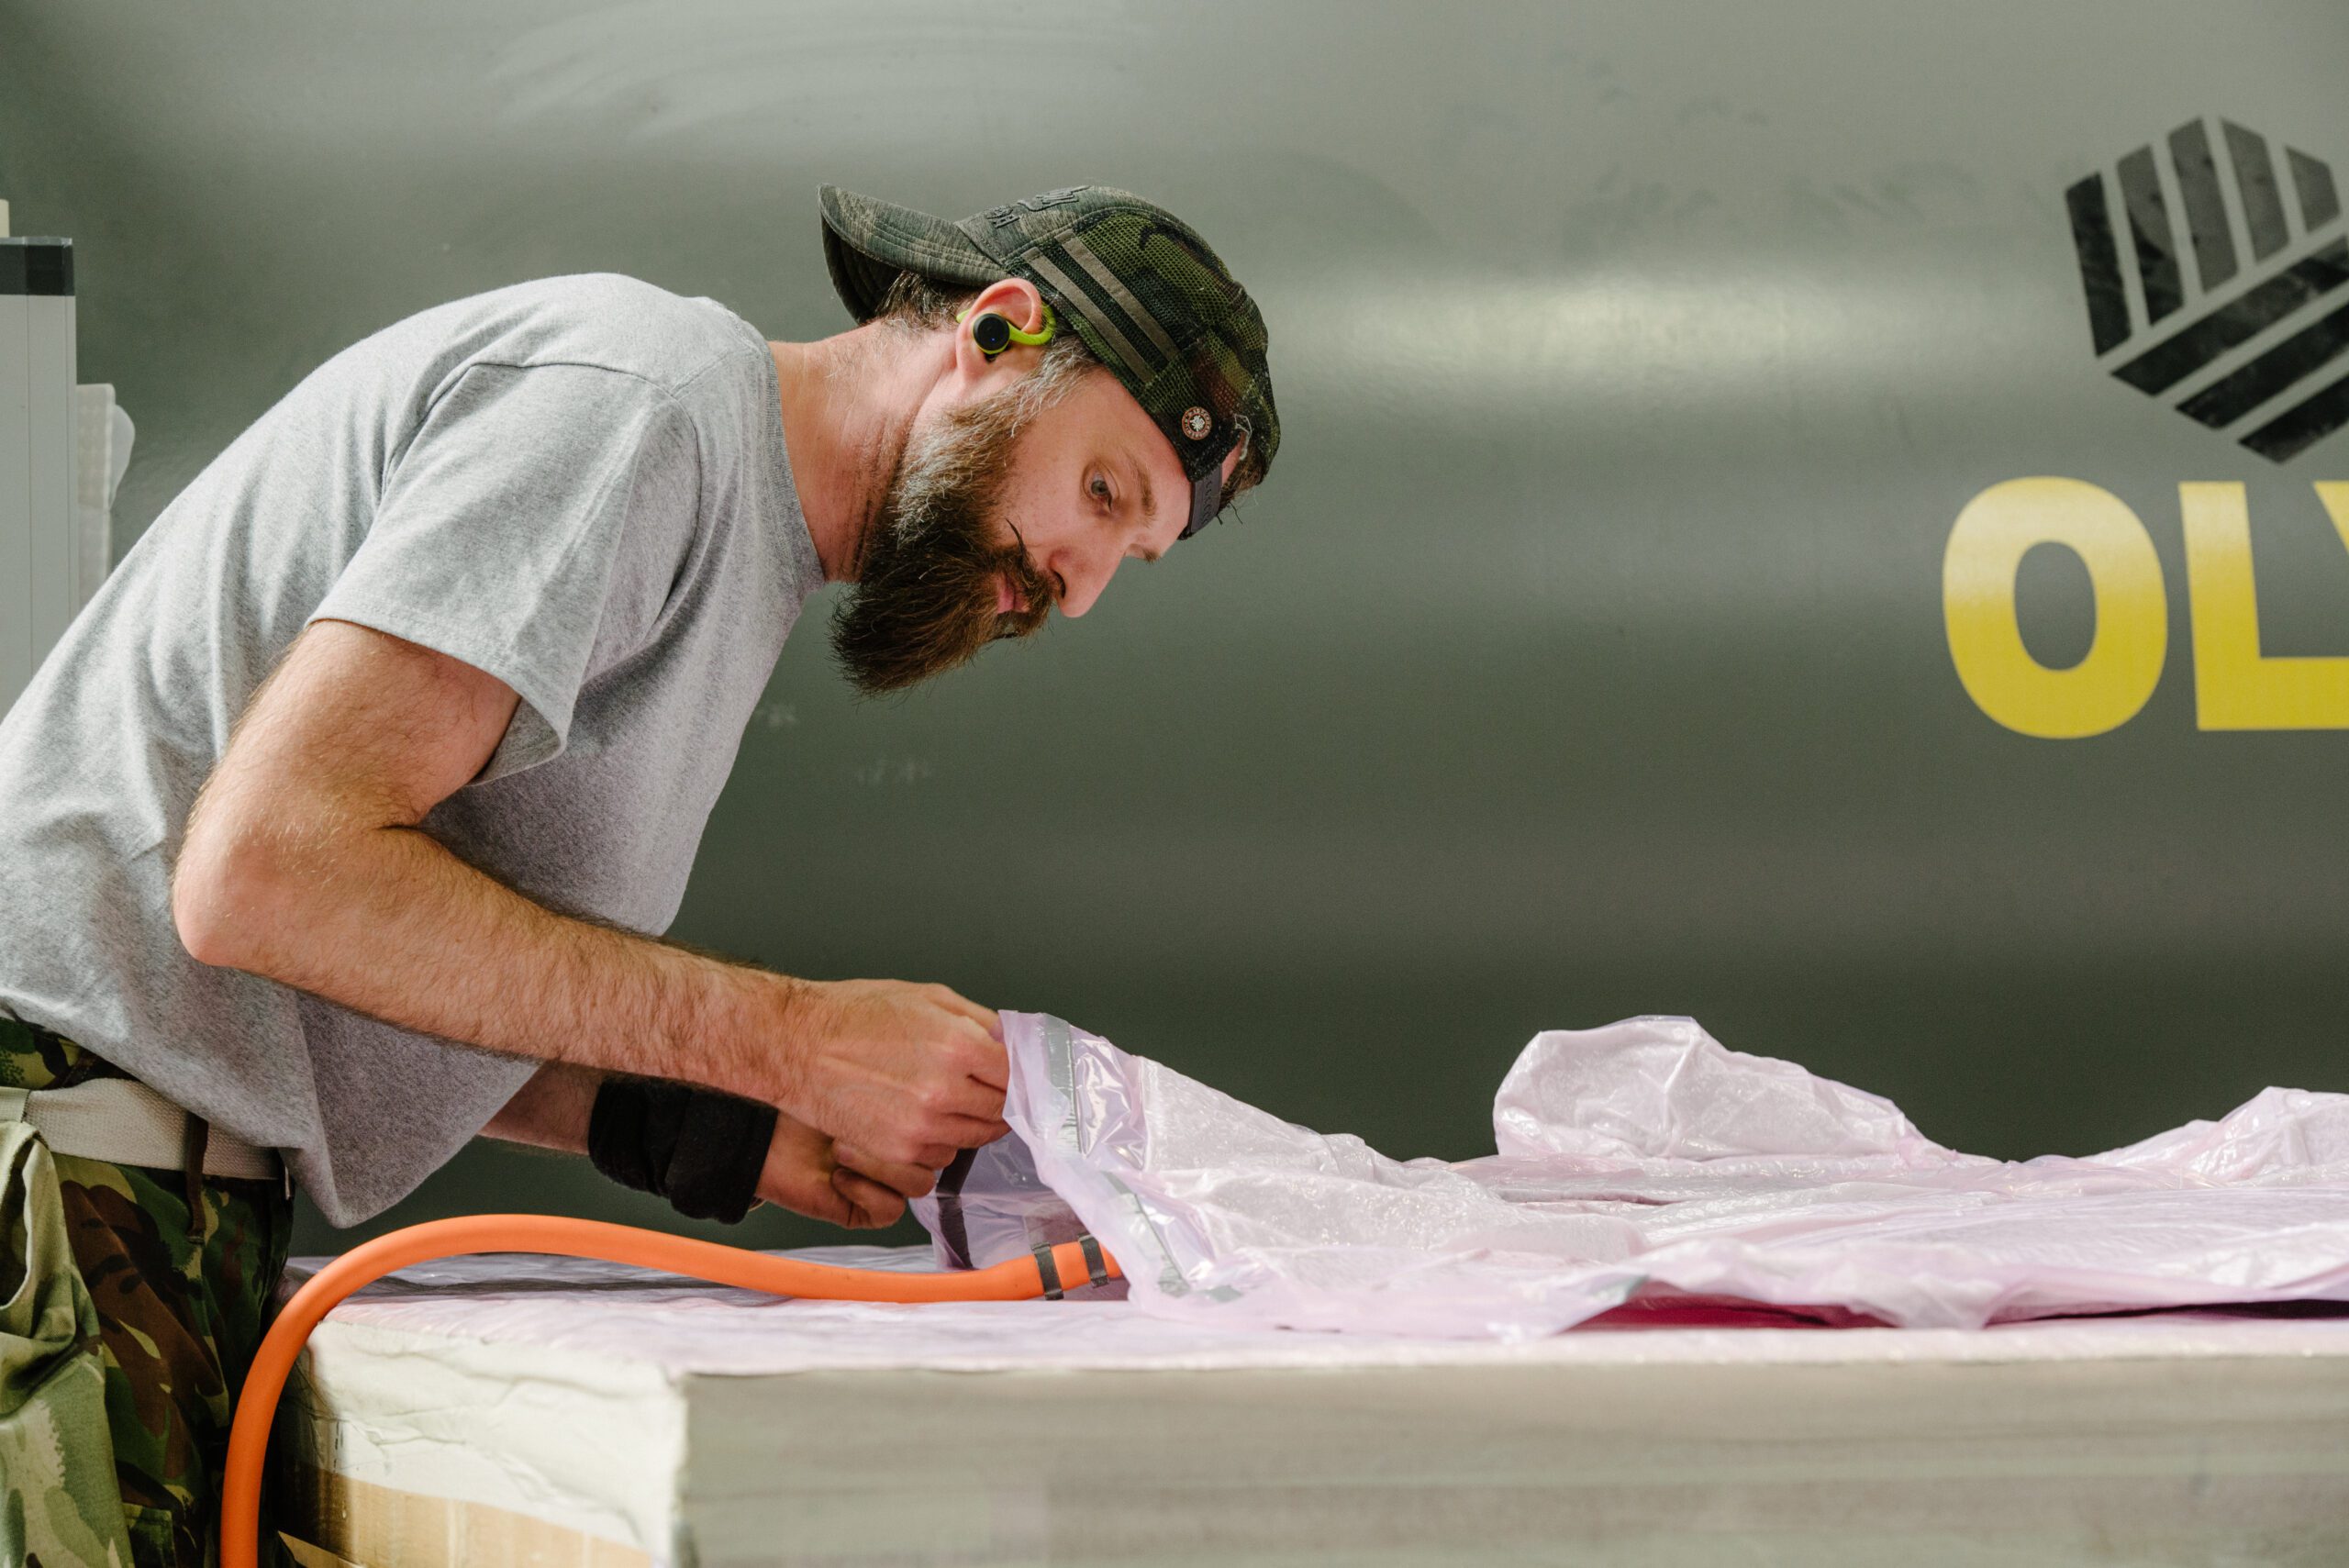 Member of the Piran team in cap and grey t-shirt working on a purple sheet material